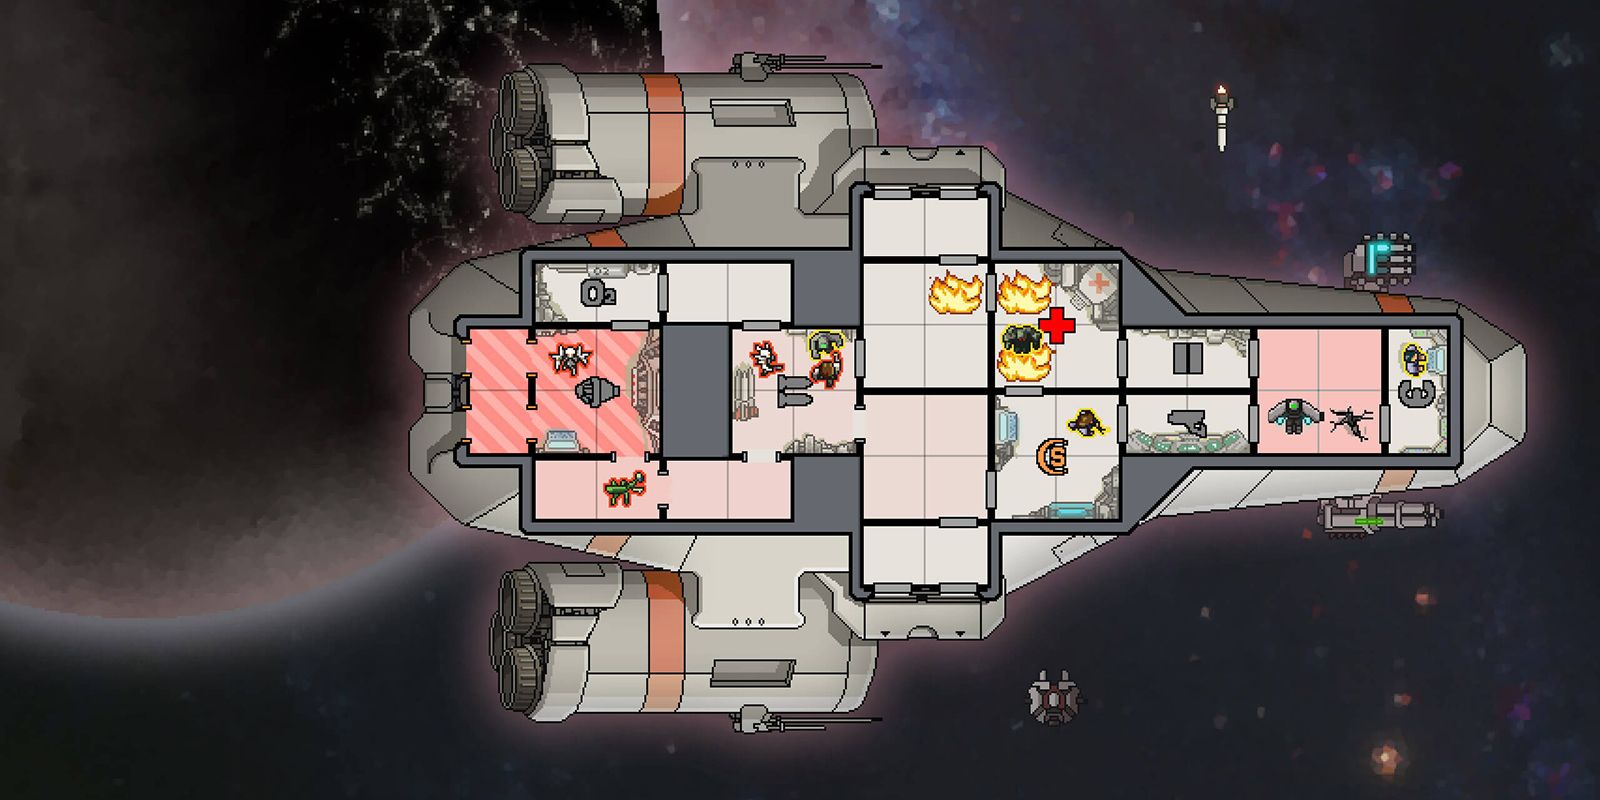 FTL Faster Than Light spaceship with multiple rooms